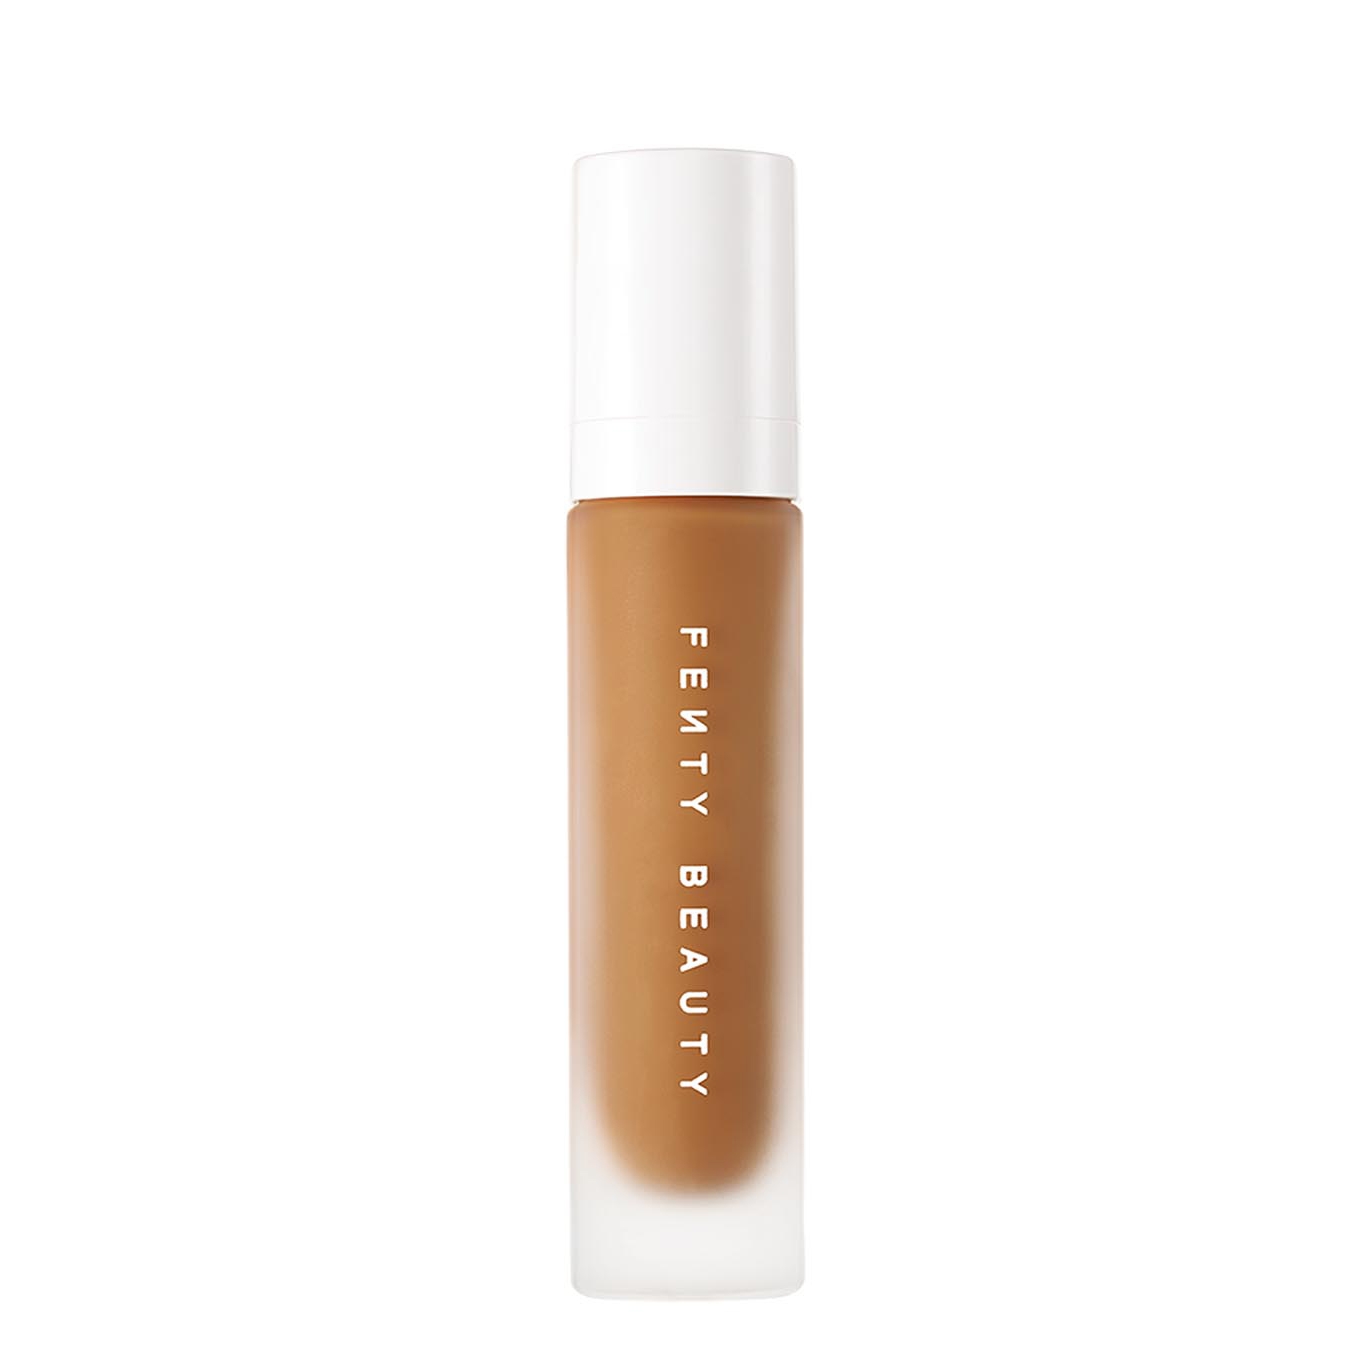 Pro Filt'r Shade Refinement, Foundation, Light-as-air